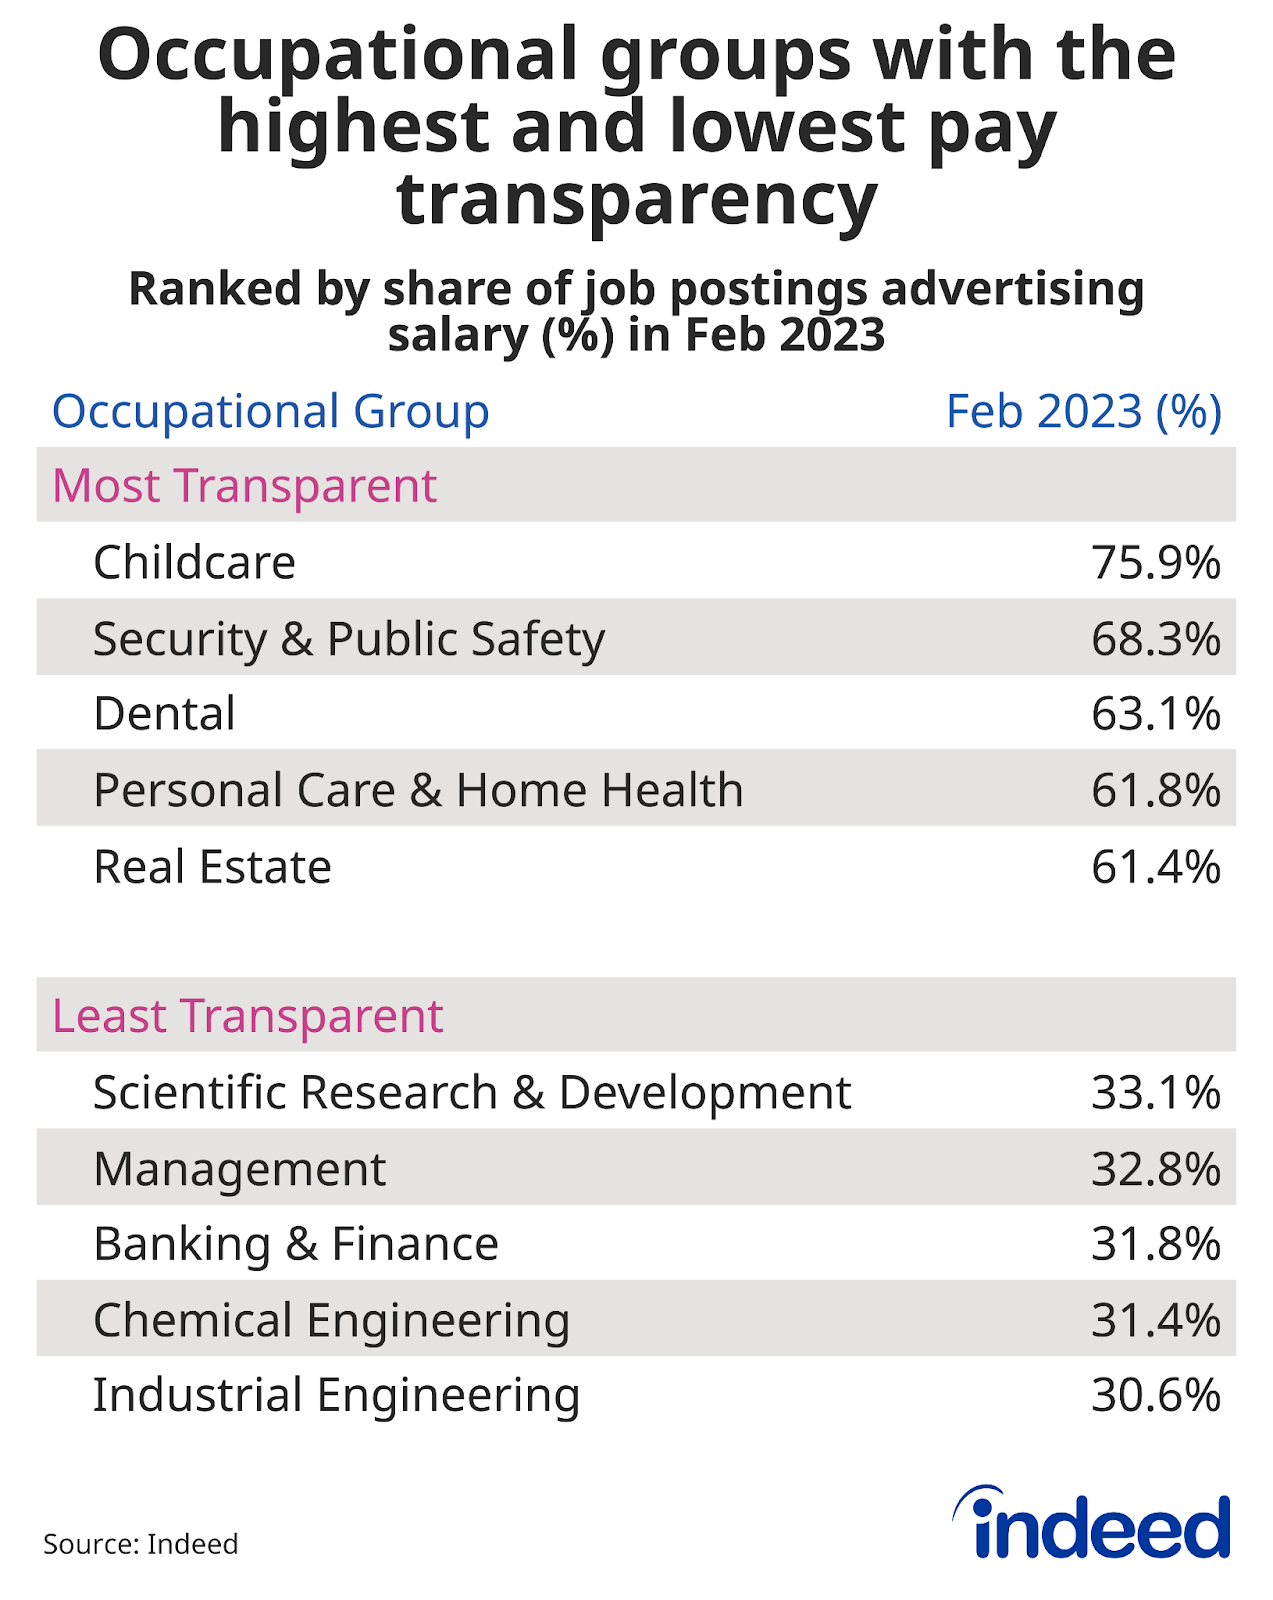 Chart titled “Occupational groups with the highest and lowest pay transparency” with columns named “Occupational Group” and “Feb 2023 (%).”